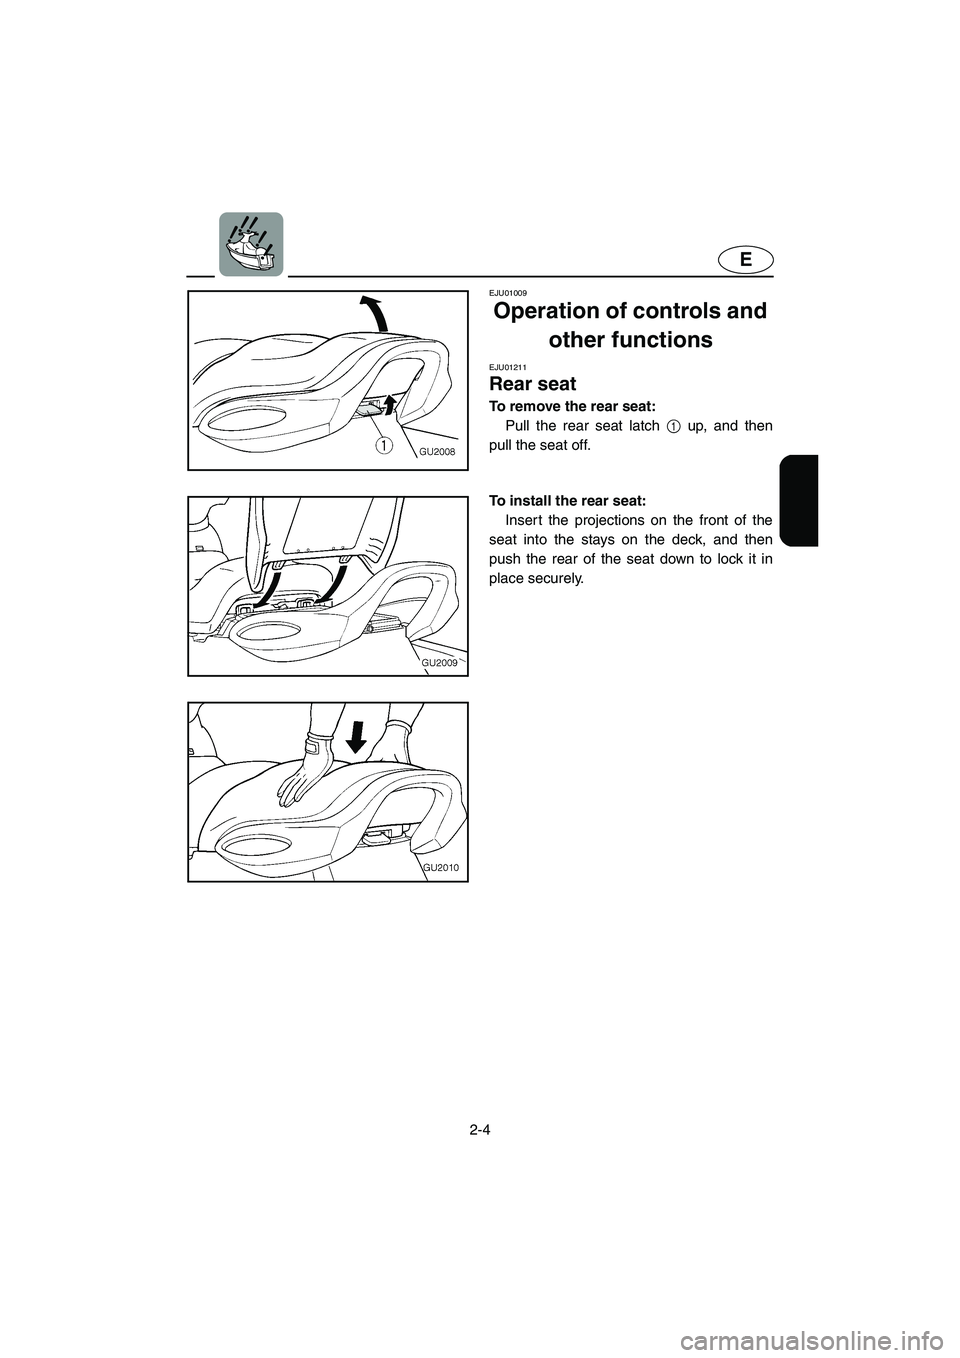 YAMAHA XL 700 2003  Owners Manual 2-4
E
EJU01009 
Operation of controls and 
other functions 
EJU01211 
Rear seat  
To remove the rear seat: 
Pull the rear seat latch 1 up, and then
pull the seat off. 
To install the rear seat: 
Inser